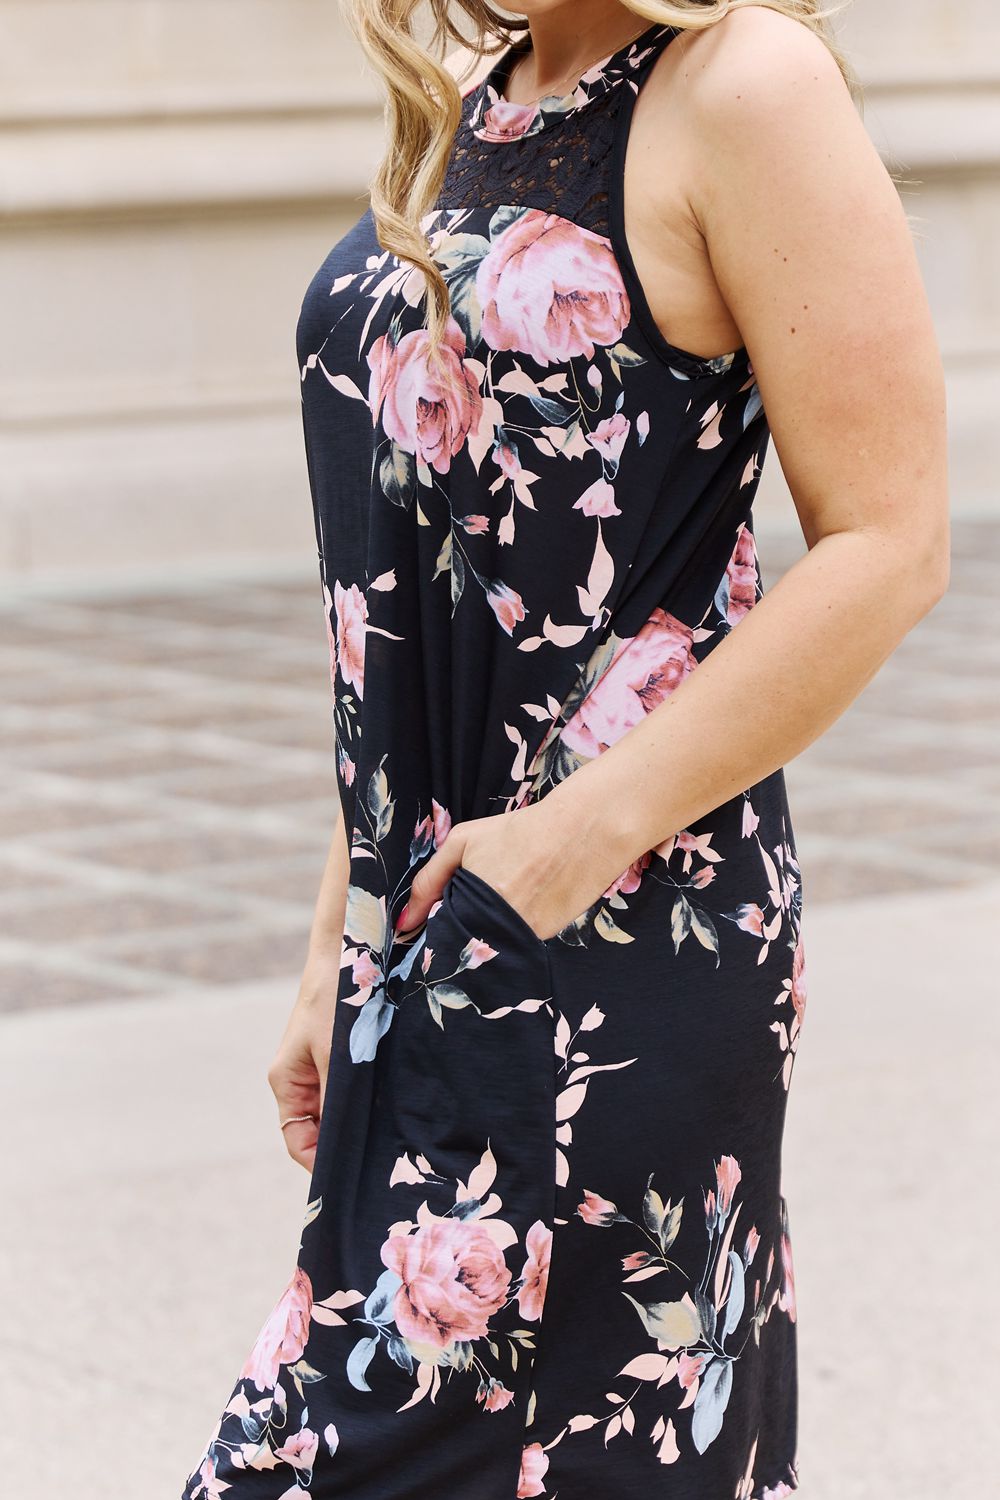 Heimish On A Journey Full Size Foral Lace Detail Sleeveless Dress - The Beauty Alley Boutique Inc